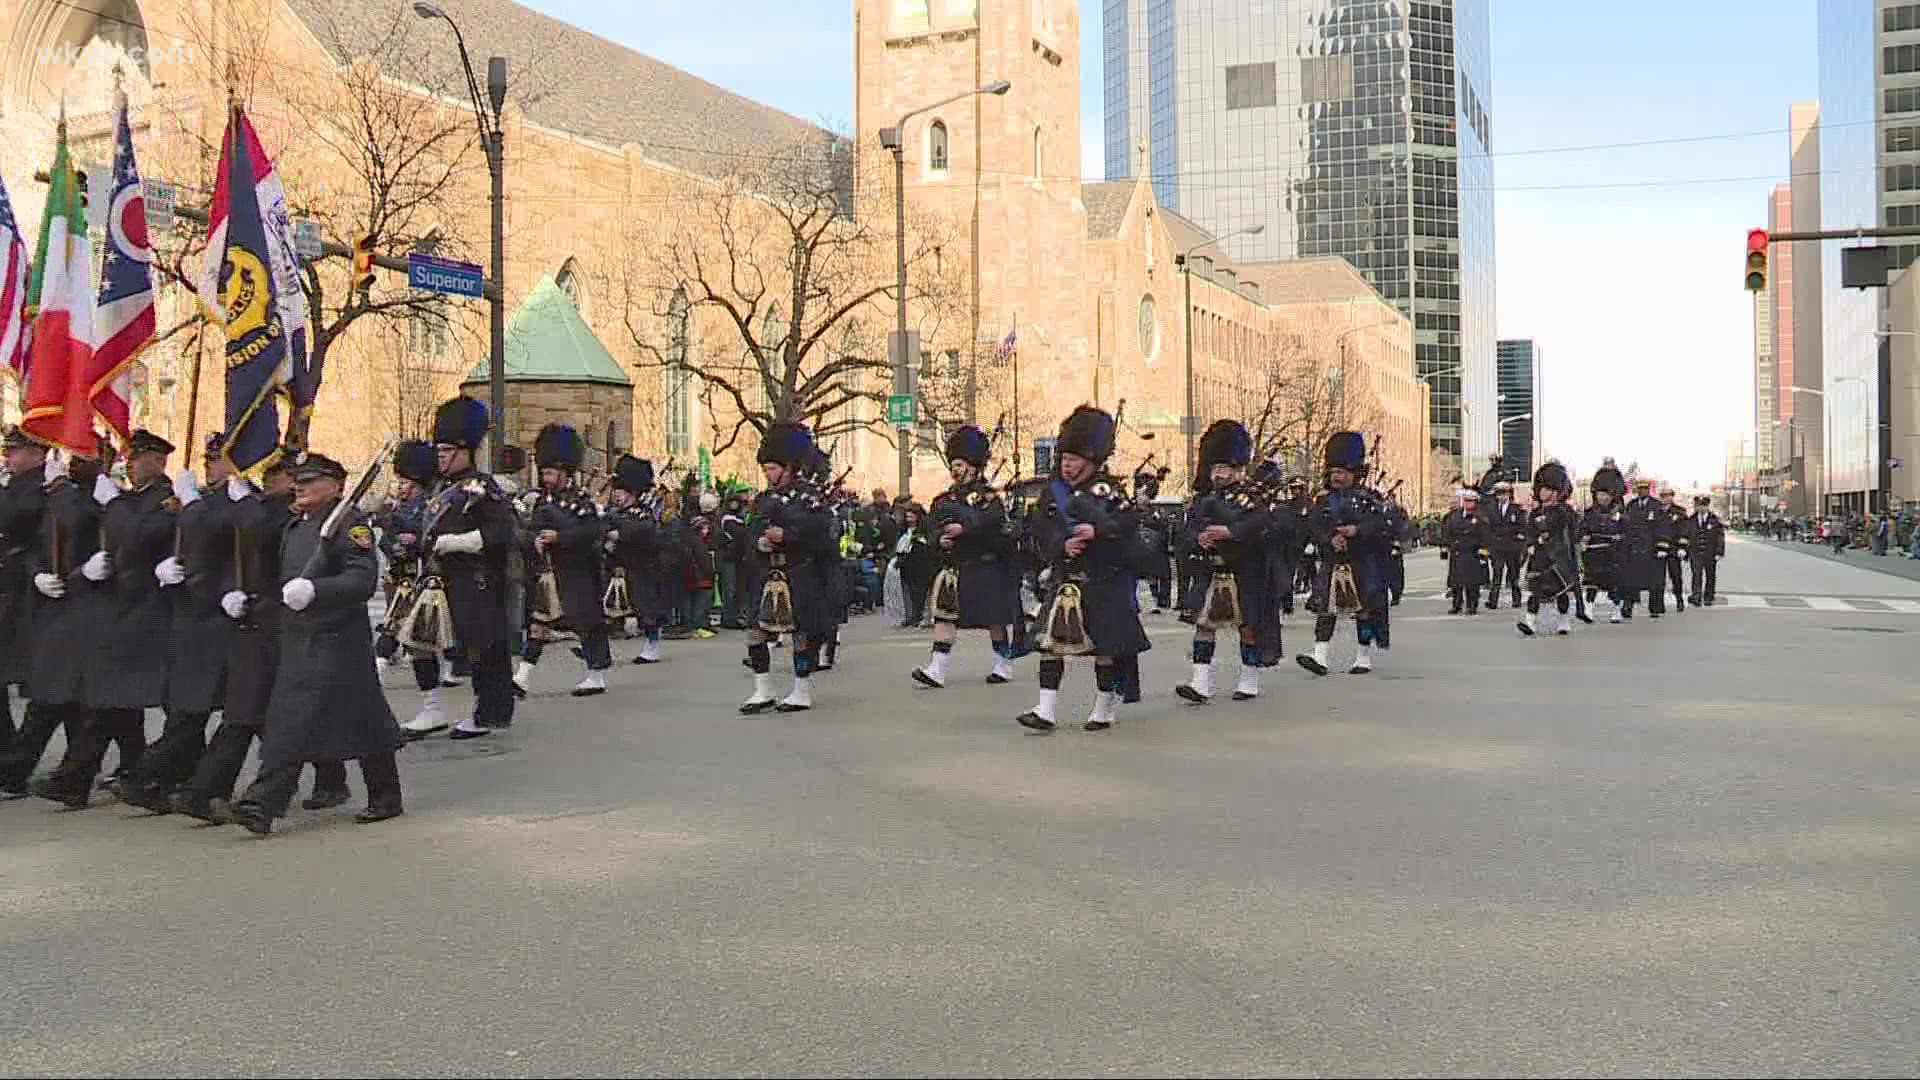 The St. Patrick's Day Parade is returning to Cleveland after it was canceled for the last two years due to COVID concerns.